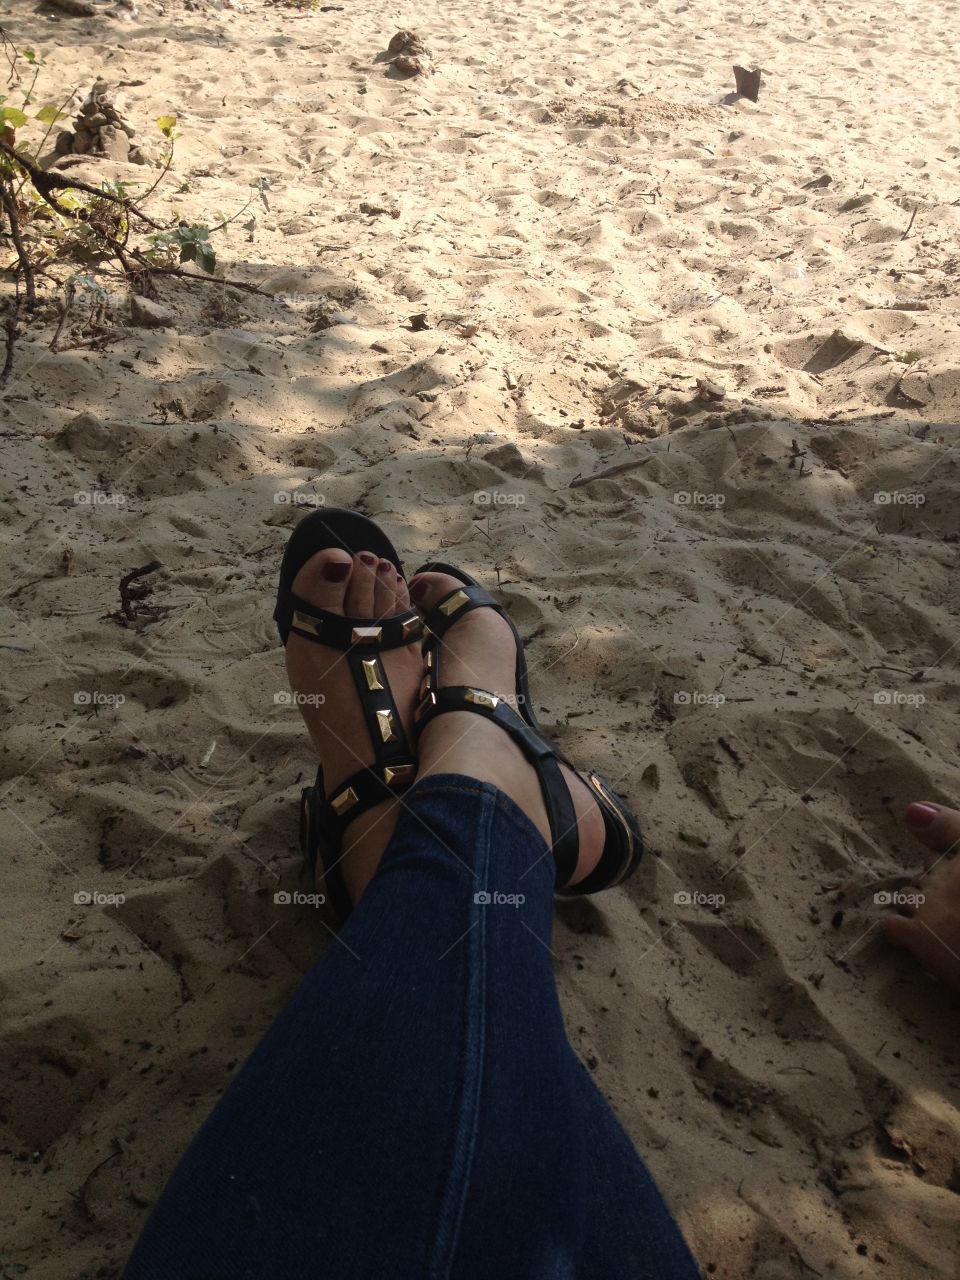 Foot on the sand